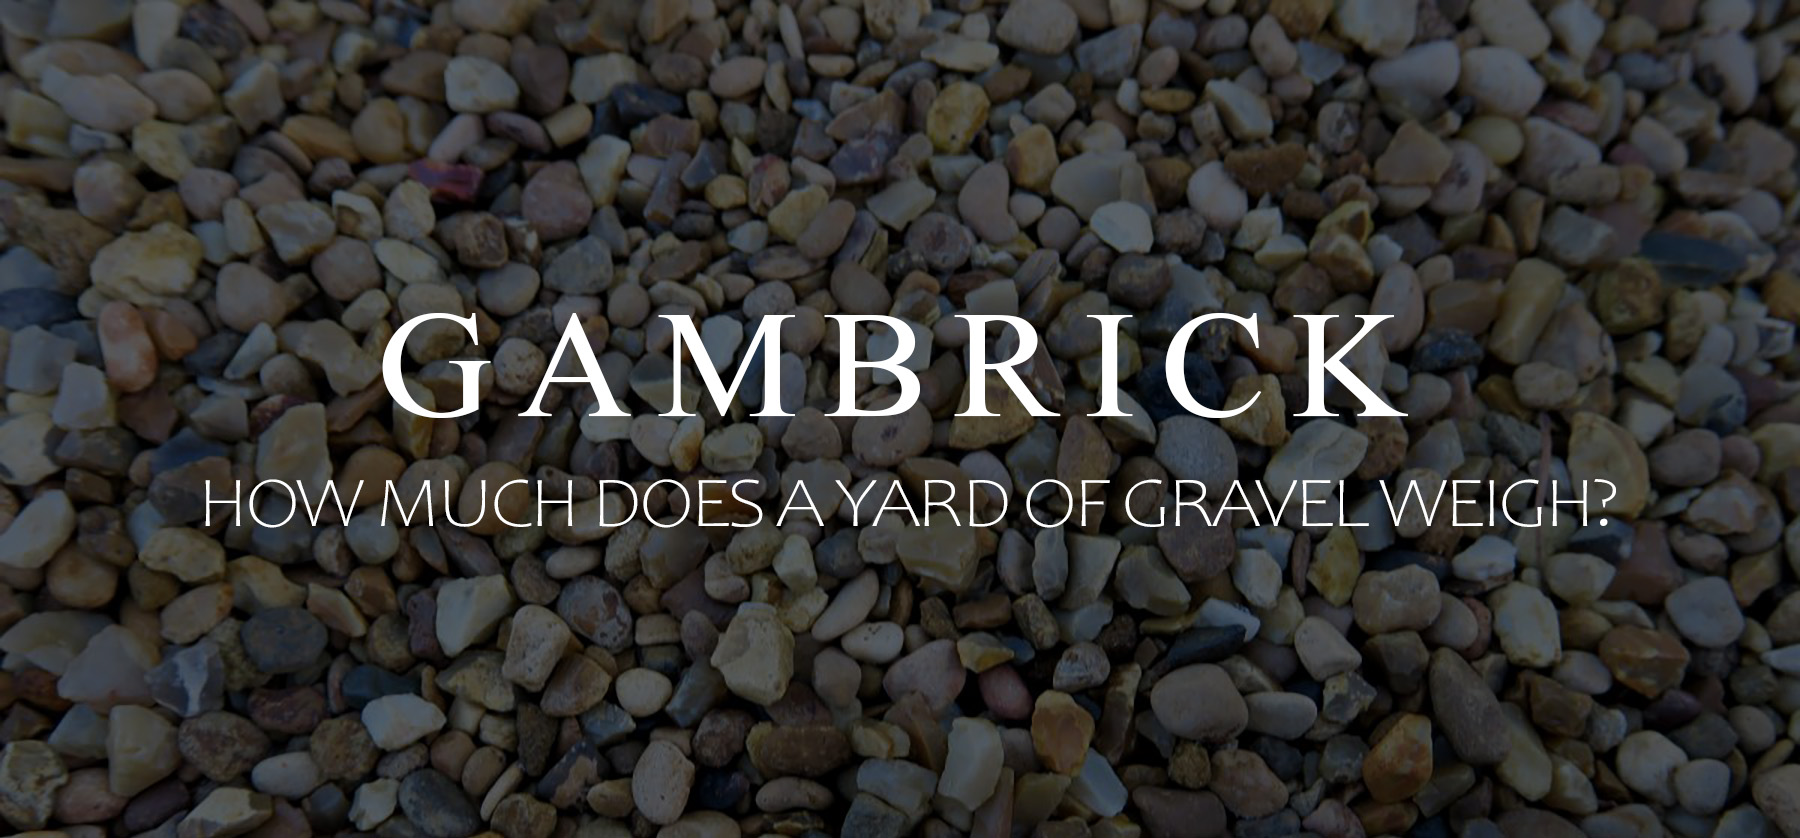 How Much Does A Yard Of Gravel Weigh? - Gambrick.com